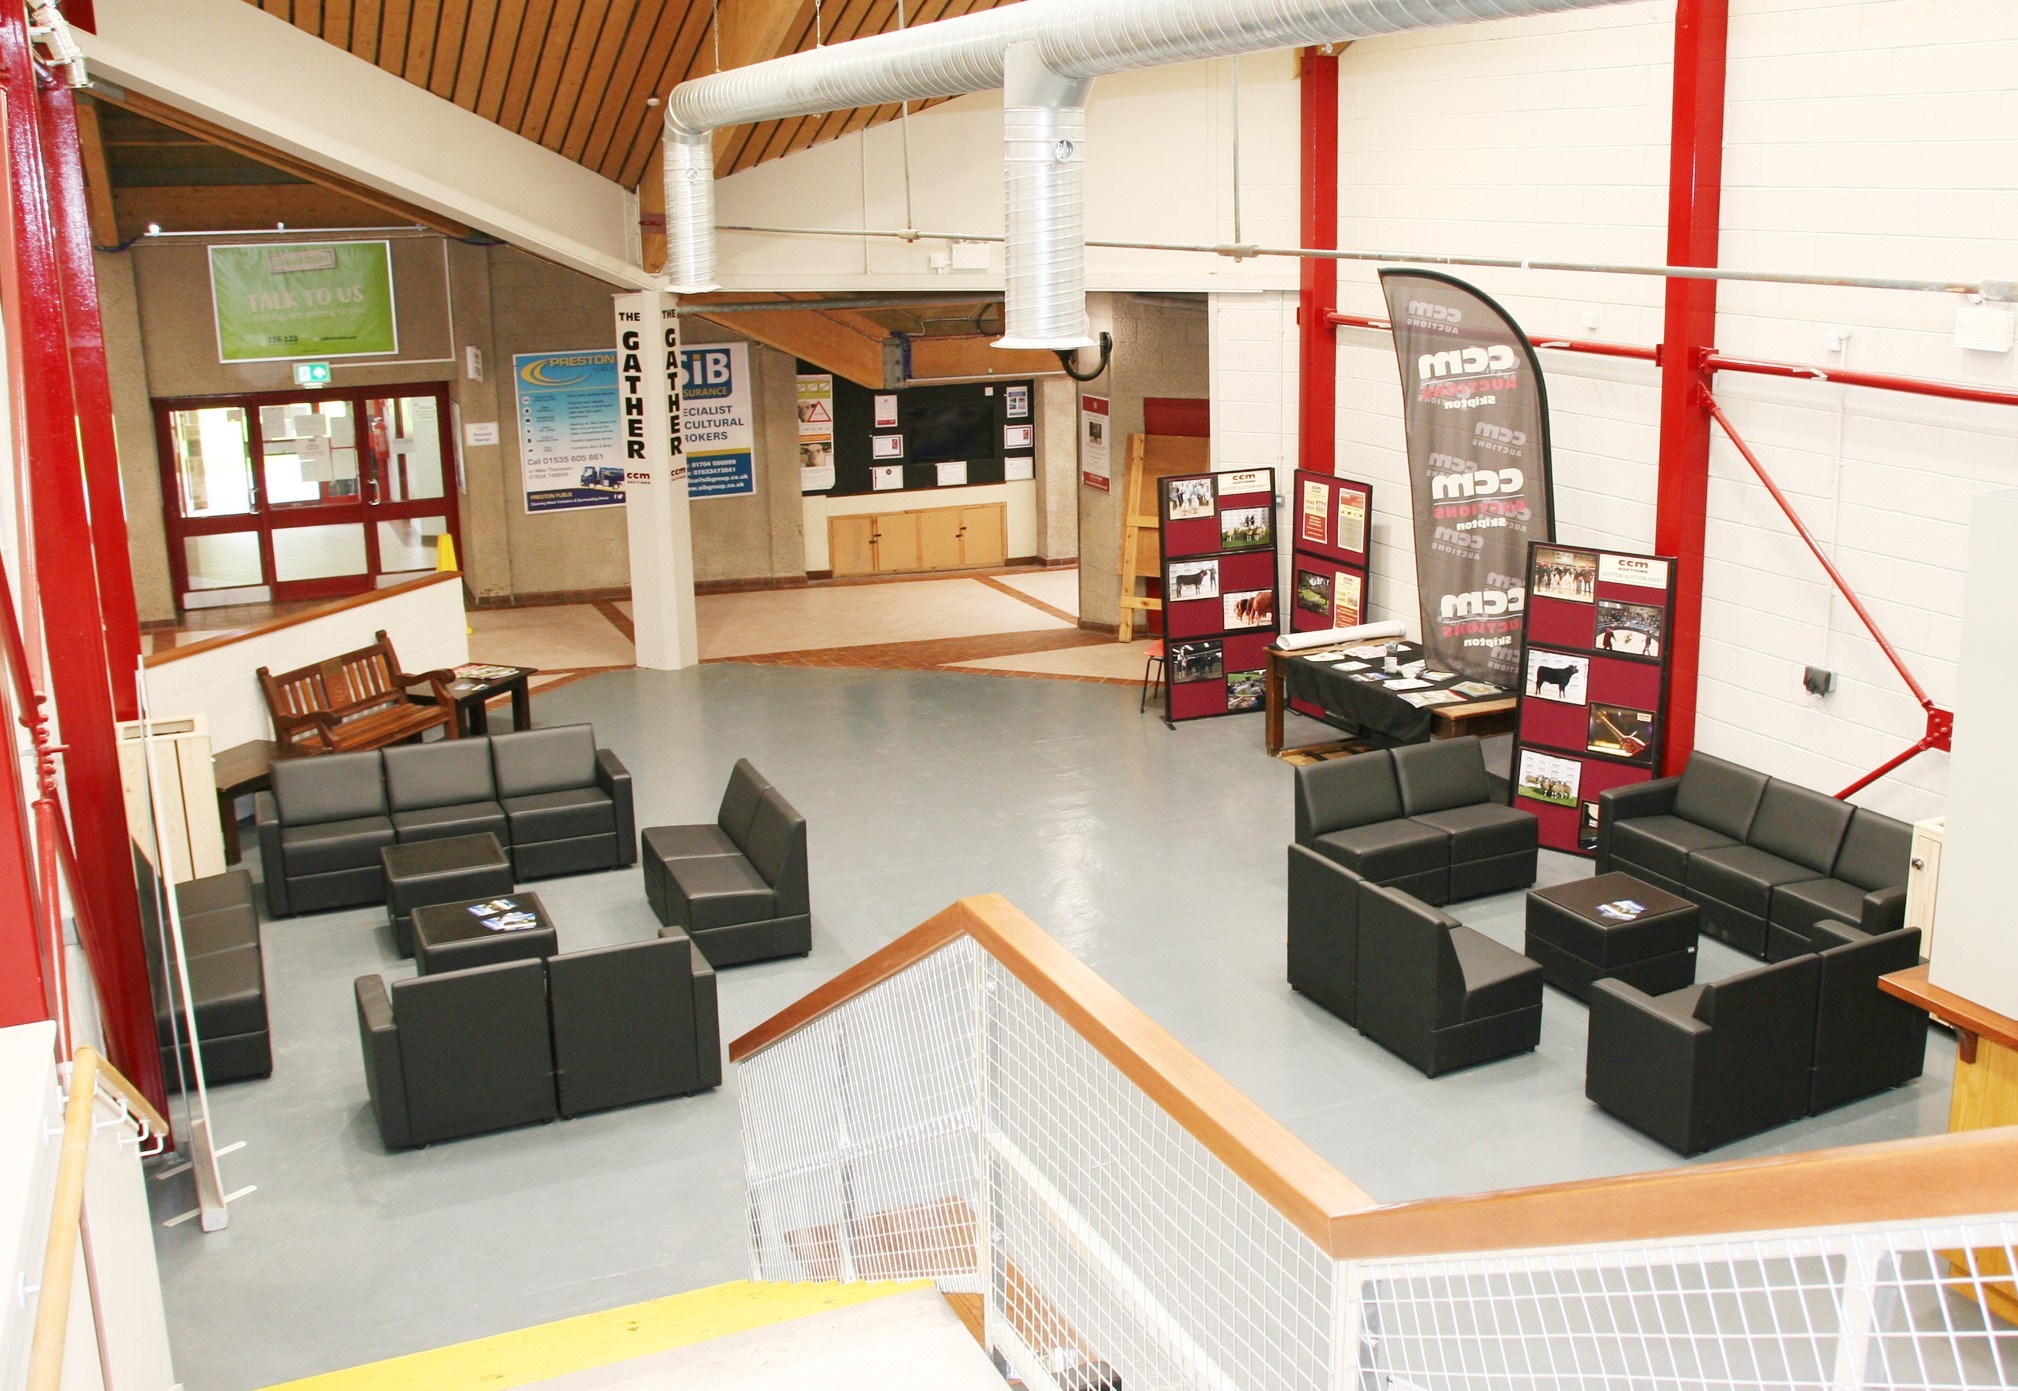 The Gather is intended as an informal meeting area for farmers attending Skipton mart